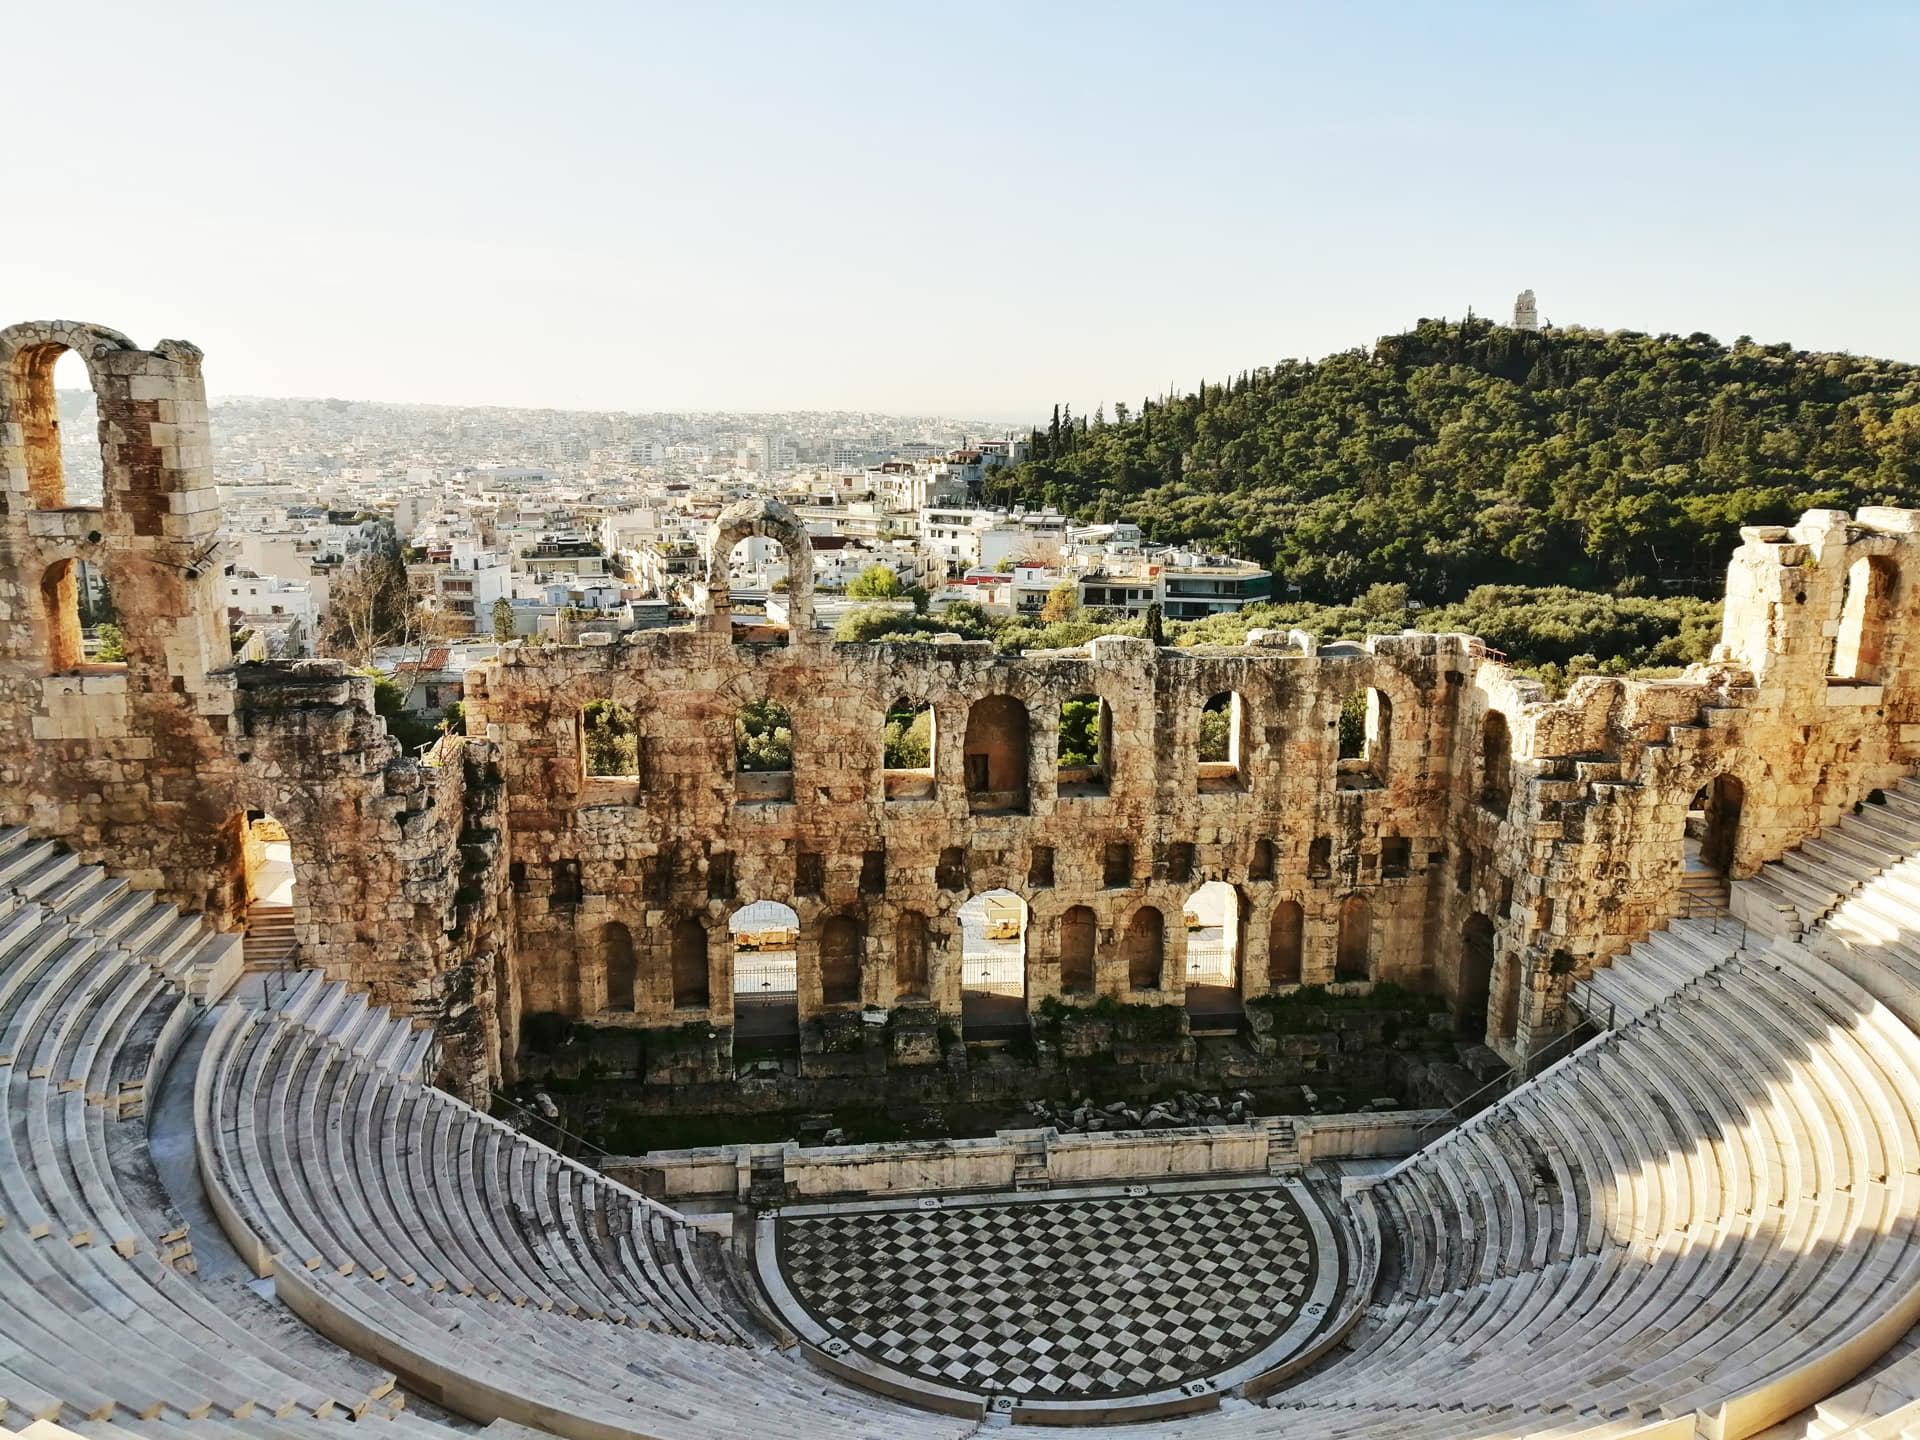 It's one of the most striking Athens monuments and one of the world’s oldest functioning theatres